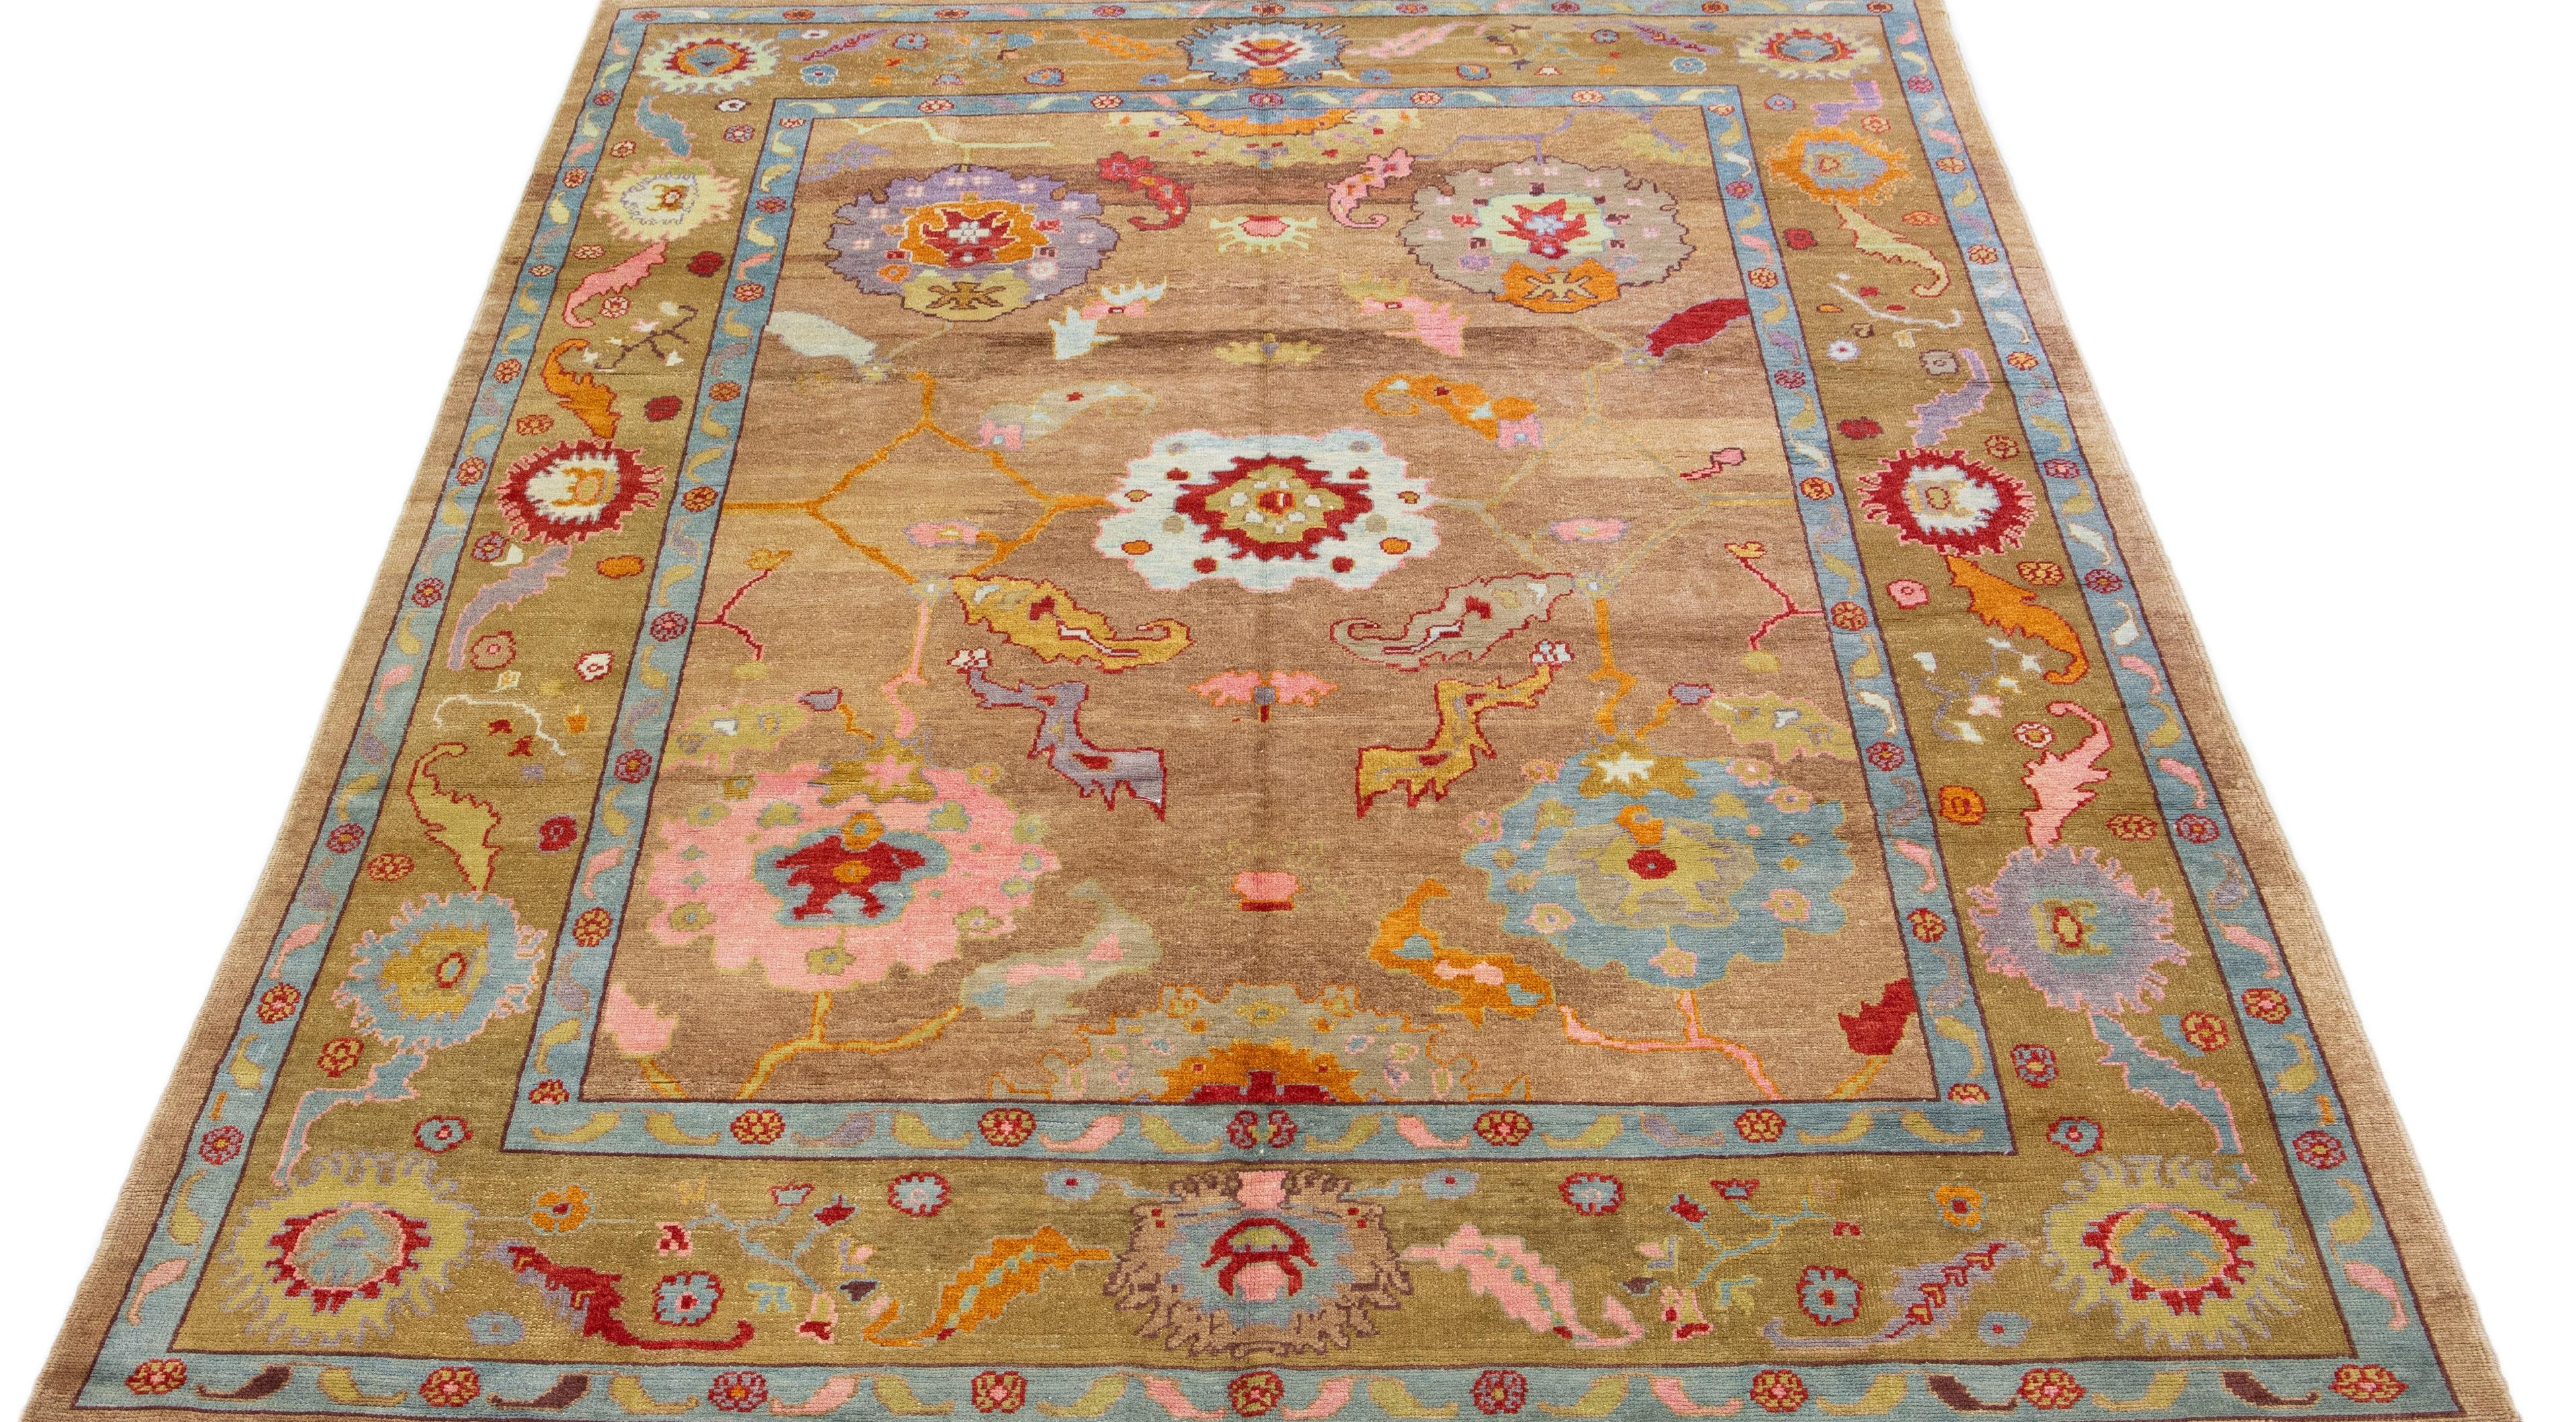 Beautiful modern Turkish Kars hand-knotted wool rug with a tan color field. This Turkish rug has a gorgeous floral pattern design with blue, pink, orange, and green accents.

This rug measures: 10' x 15'1